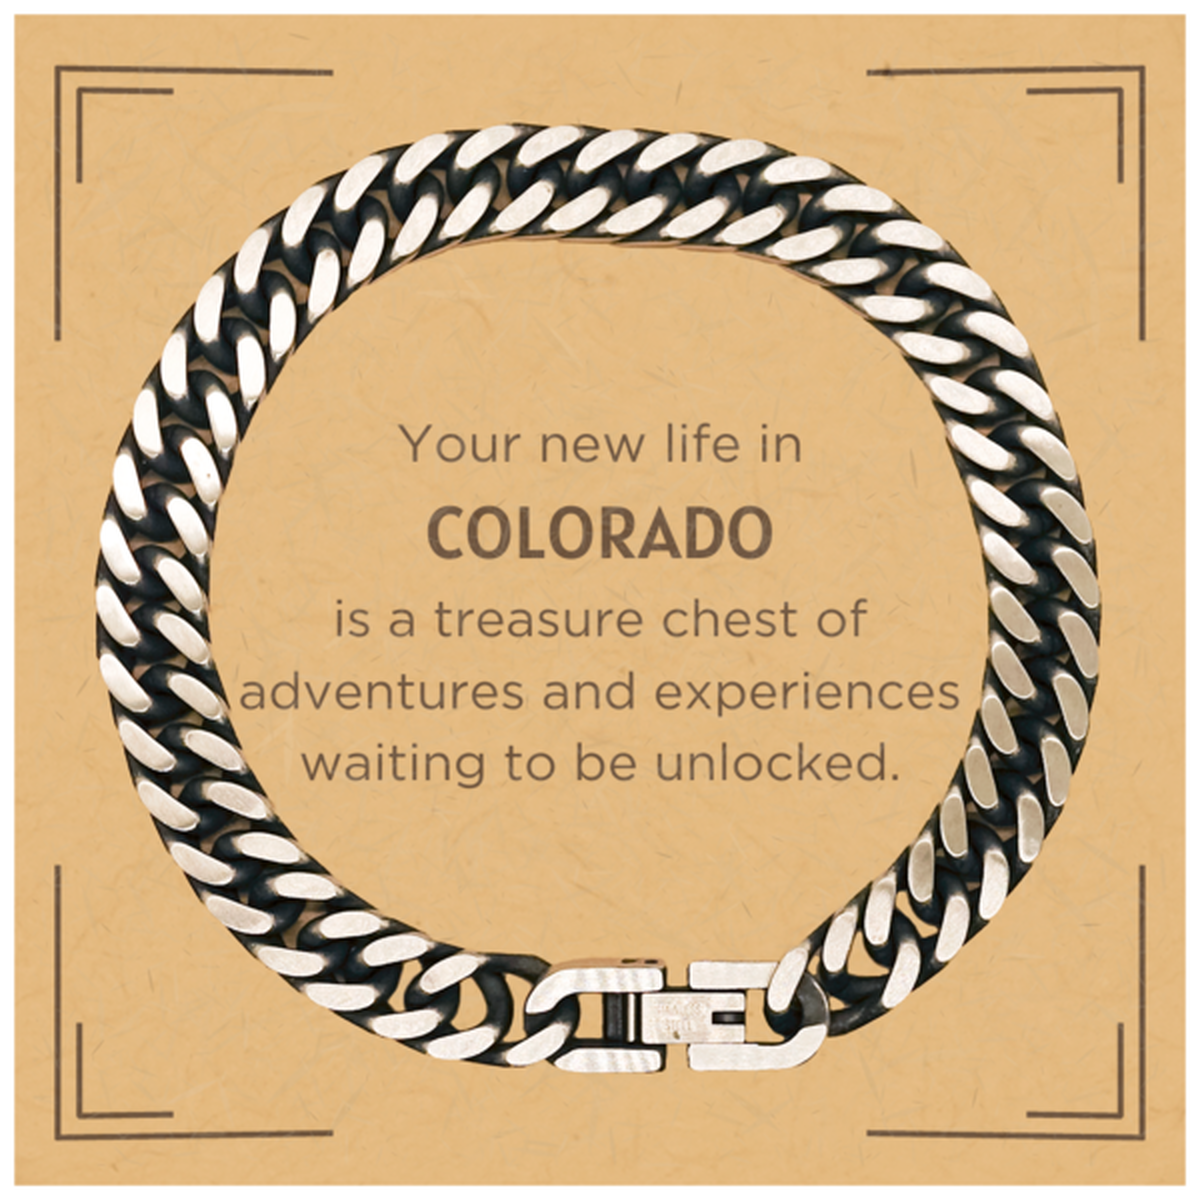 Moving to Colorado Gifts, Your new life in Colorado, Long Distance Colorado Christmas Cuban Link Chain Bracelet For Men, Women, Friends, Coworkers